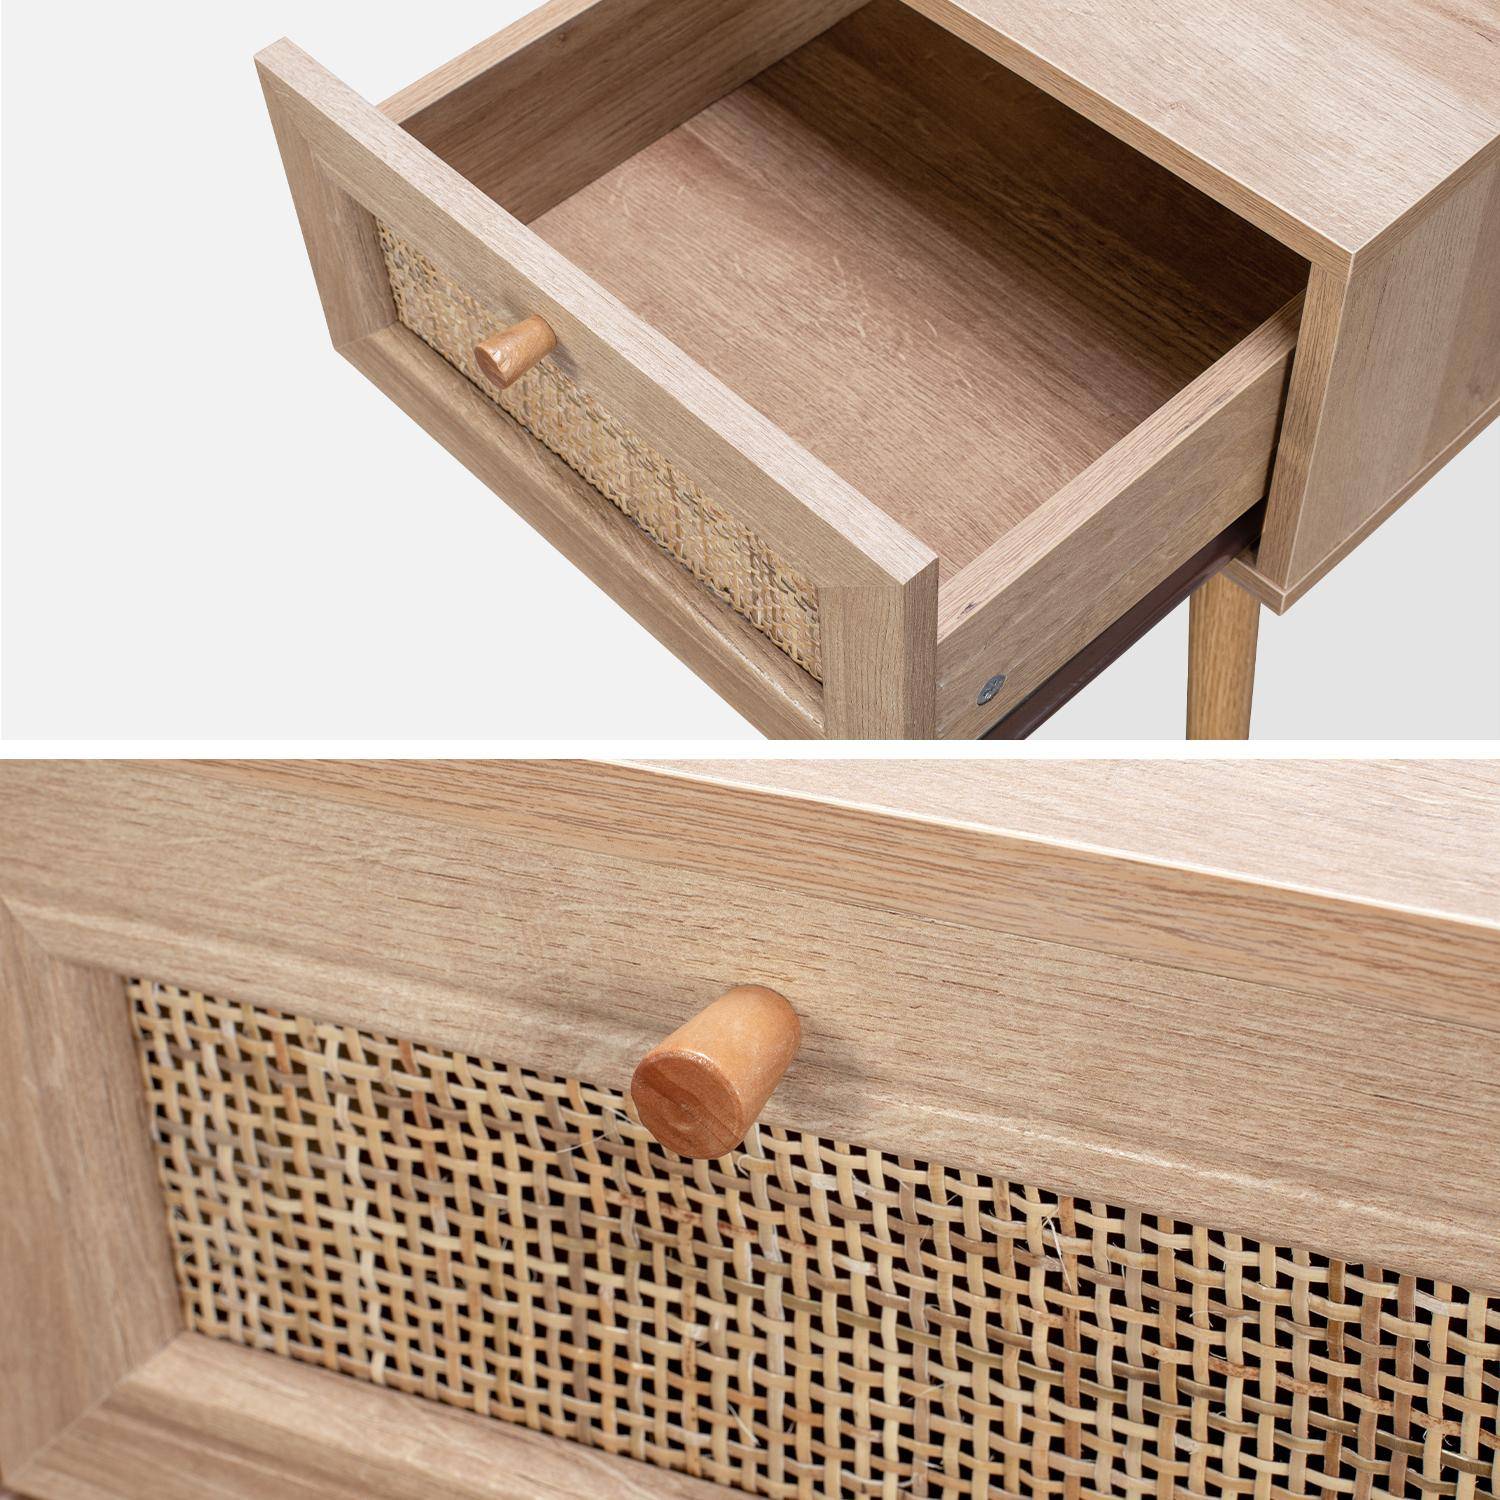 Woven rattan bedside table with drawer, 39x39x55.4cm - Boheme - Natural Wood colour Photo7